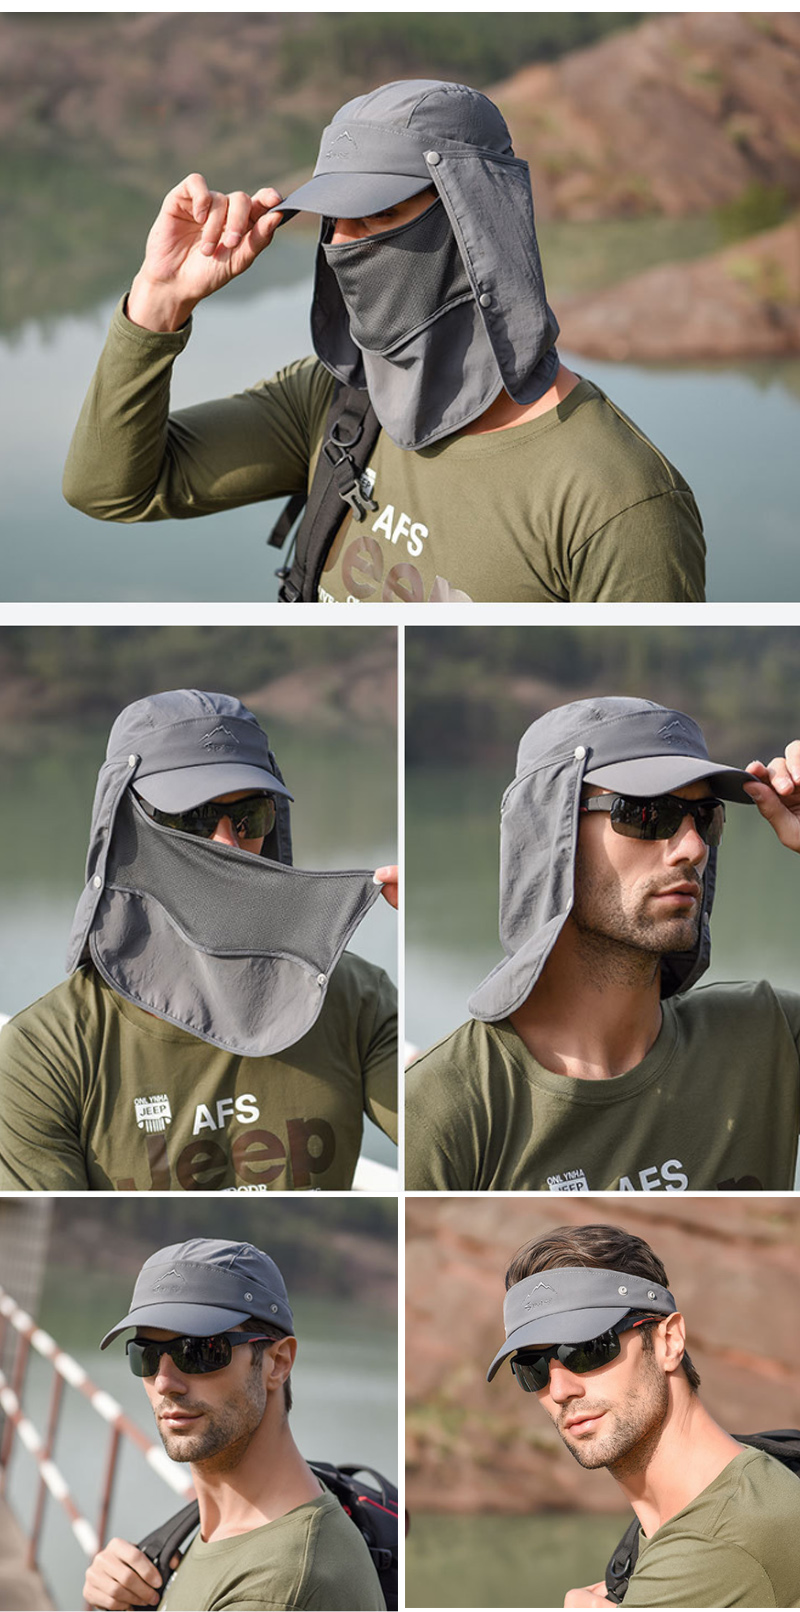 Naturehike-Fishing-Hat-Foldable-Detachable-Sun-Protection-Breathable-Mosquito-Veil-Camping-Fishing-H-1515883-2